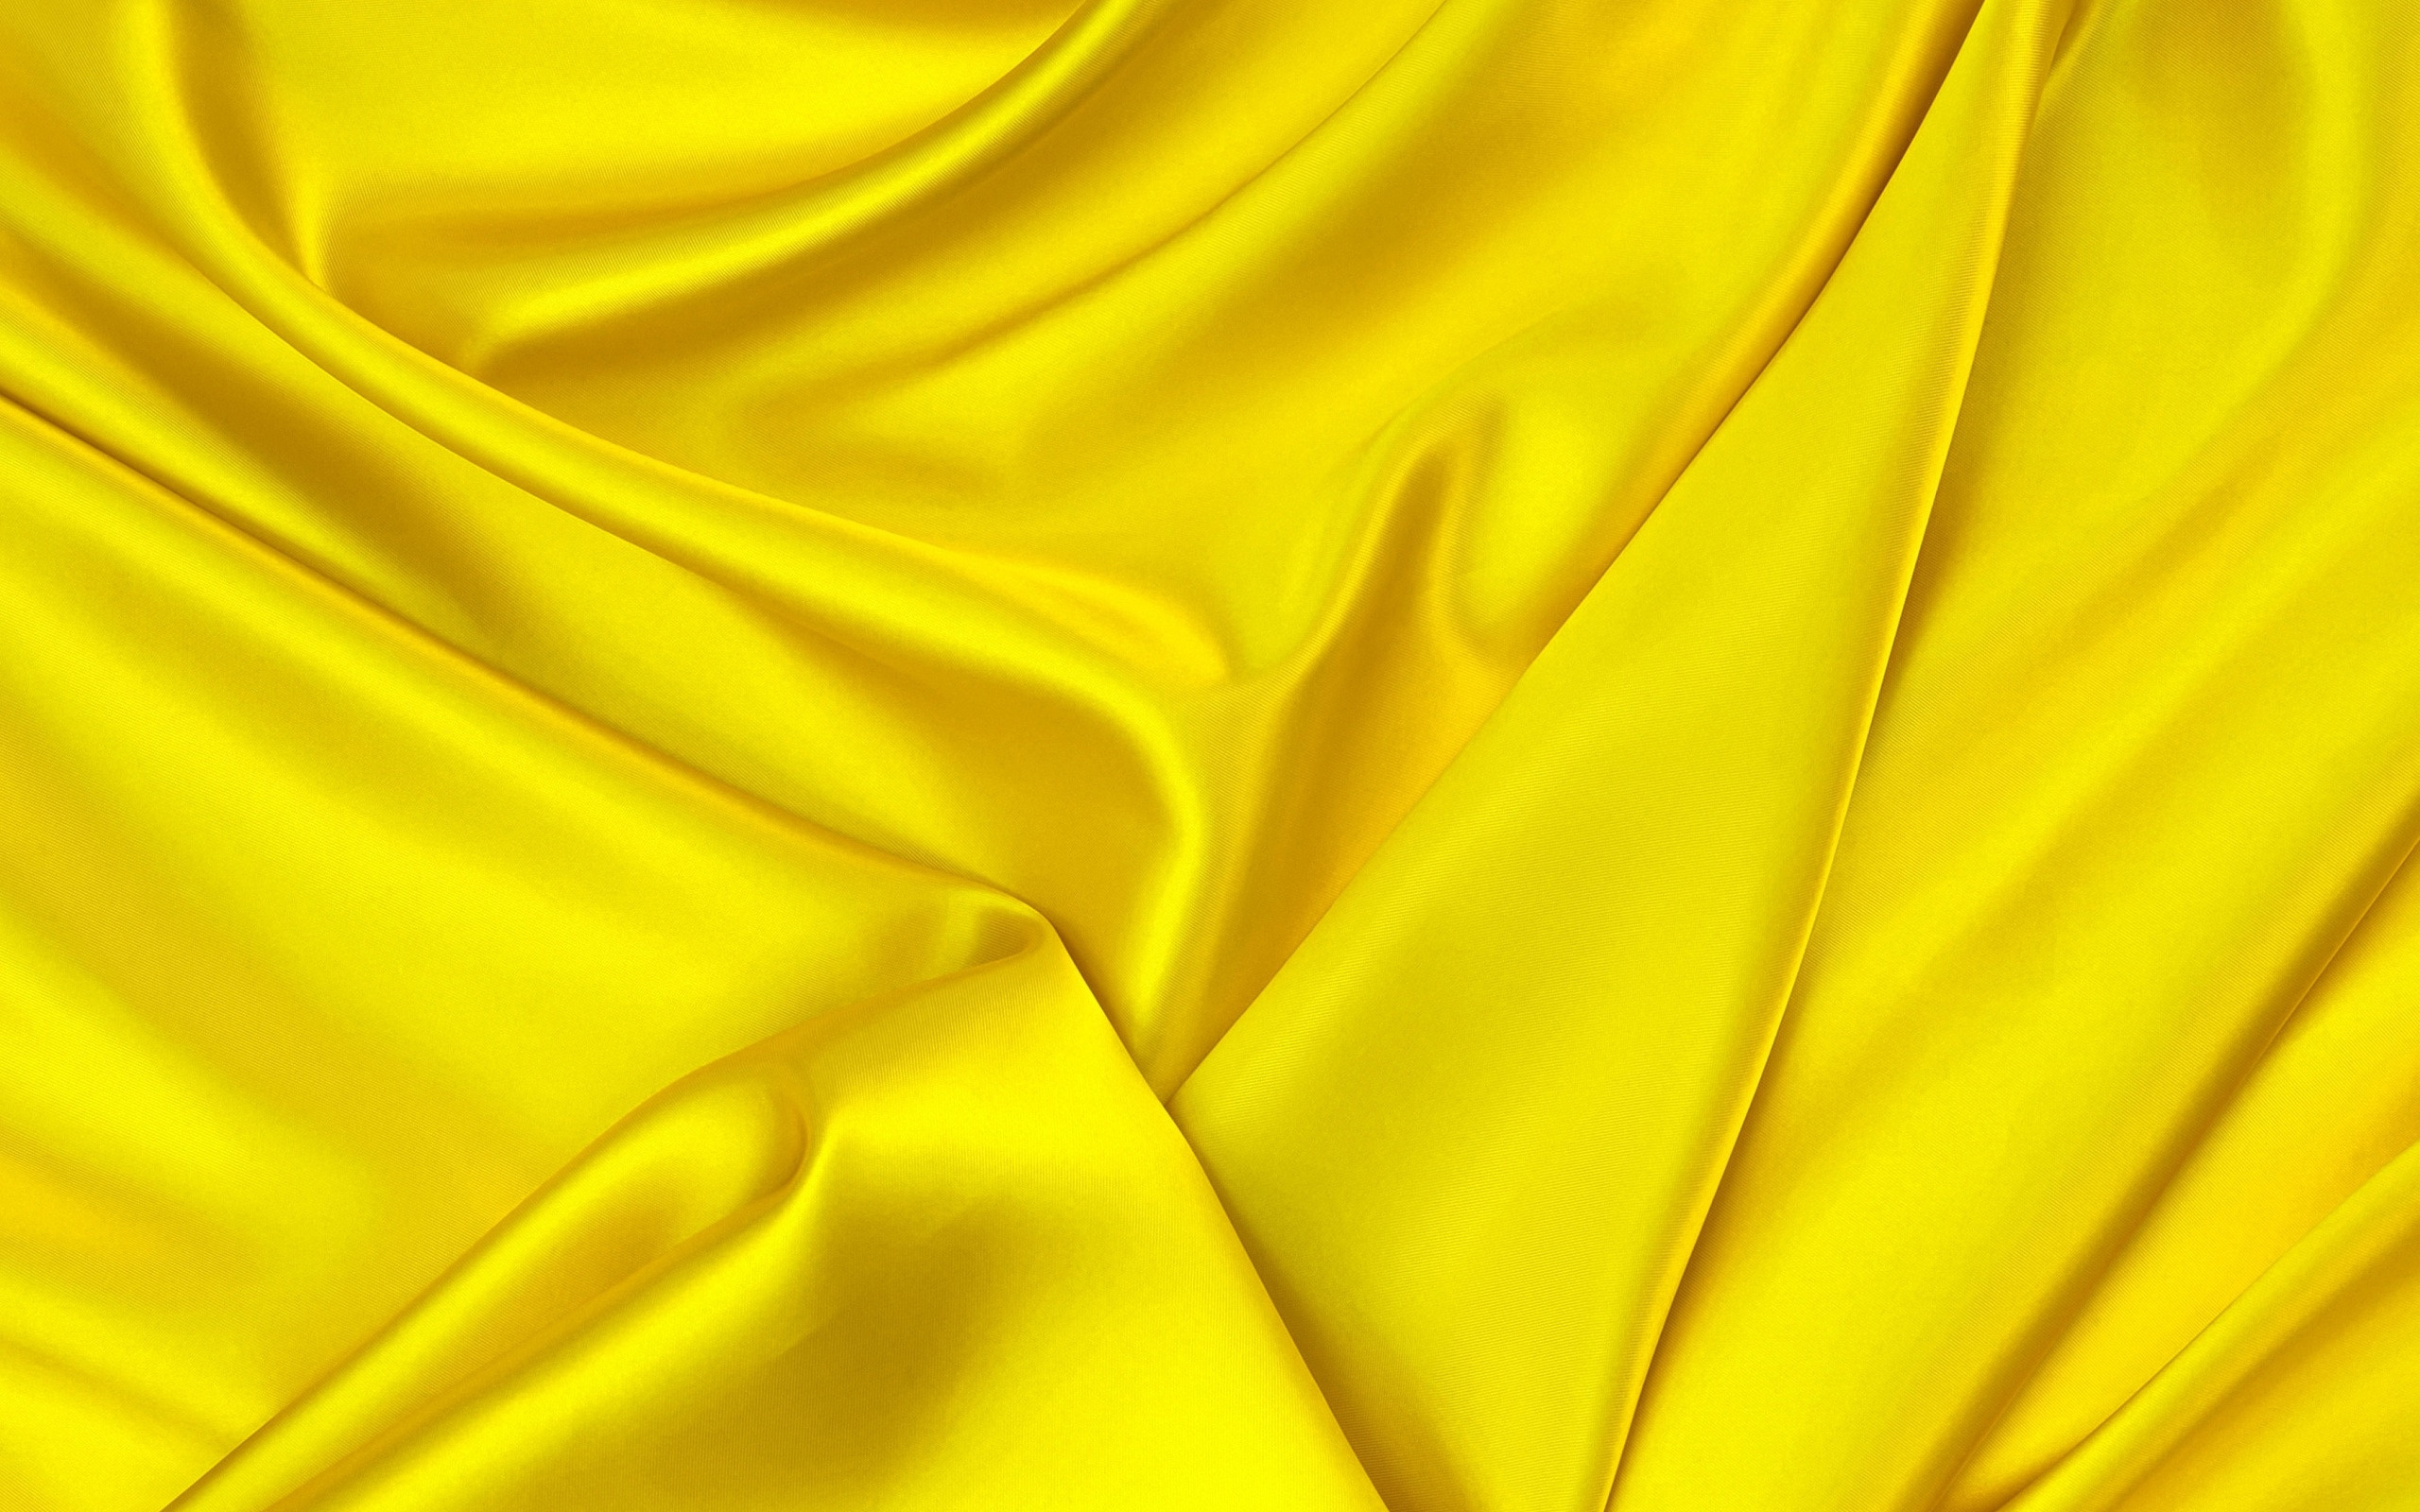 Yellow silk texture, Silk fabric texture, High-quality pictures, Serenity, 2560x1600 HD Desktop